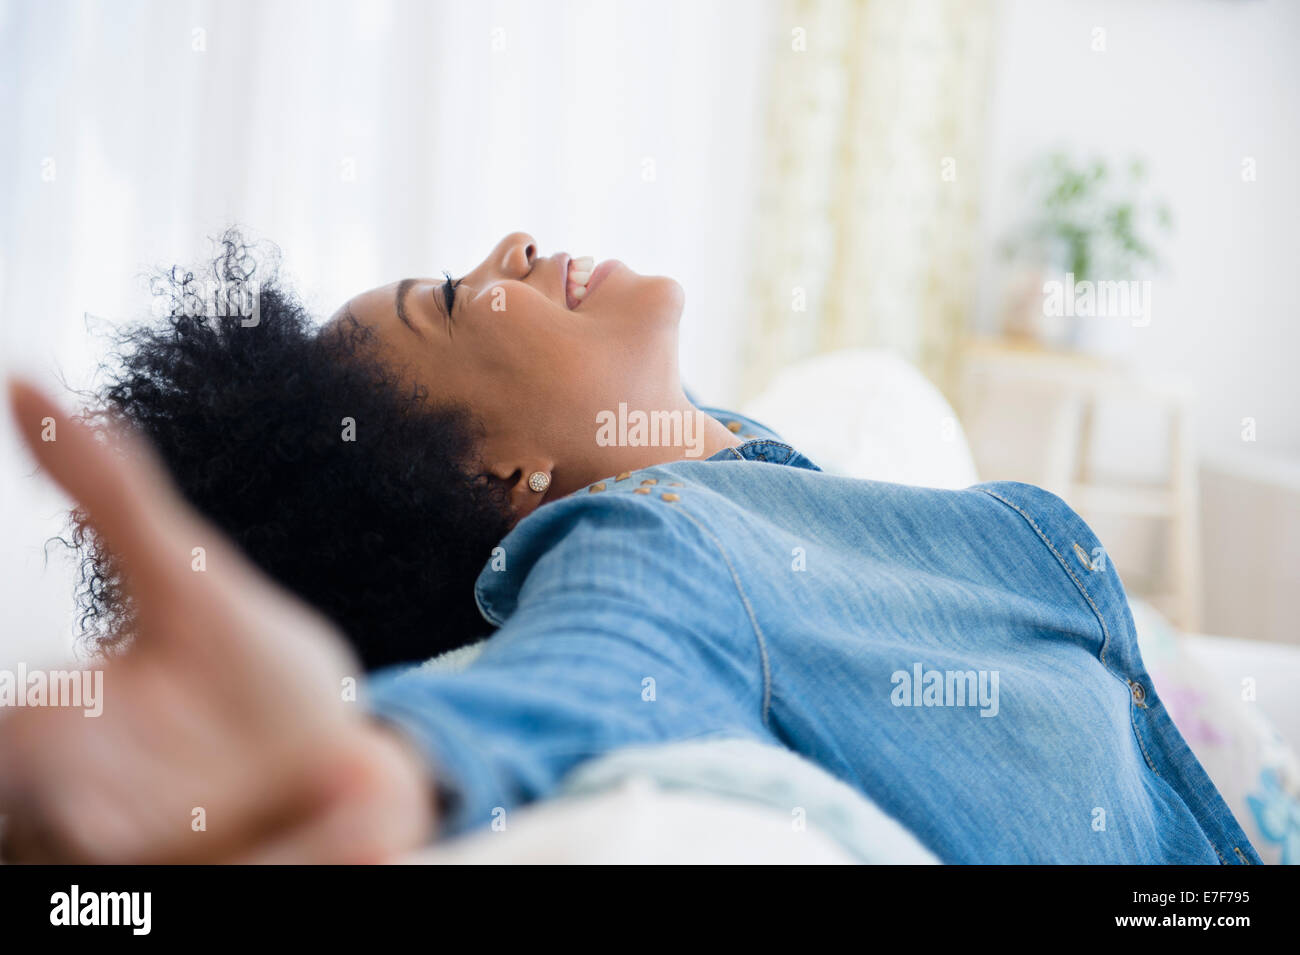 African American Woman with arms outstretched on sofa Banque D'Images